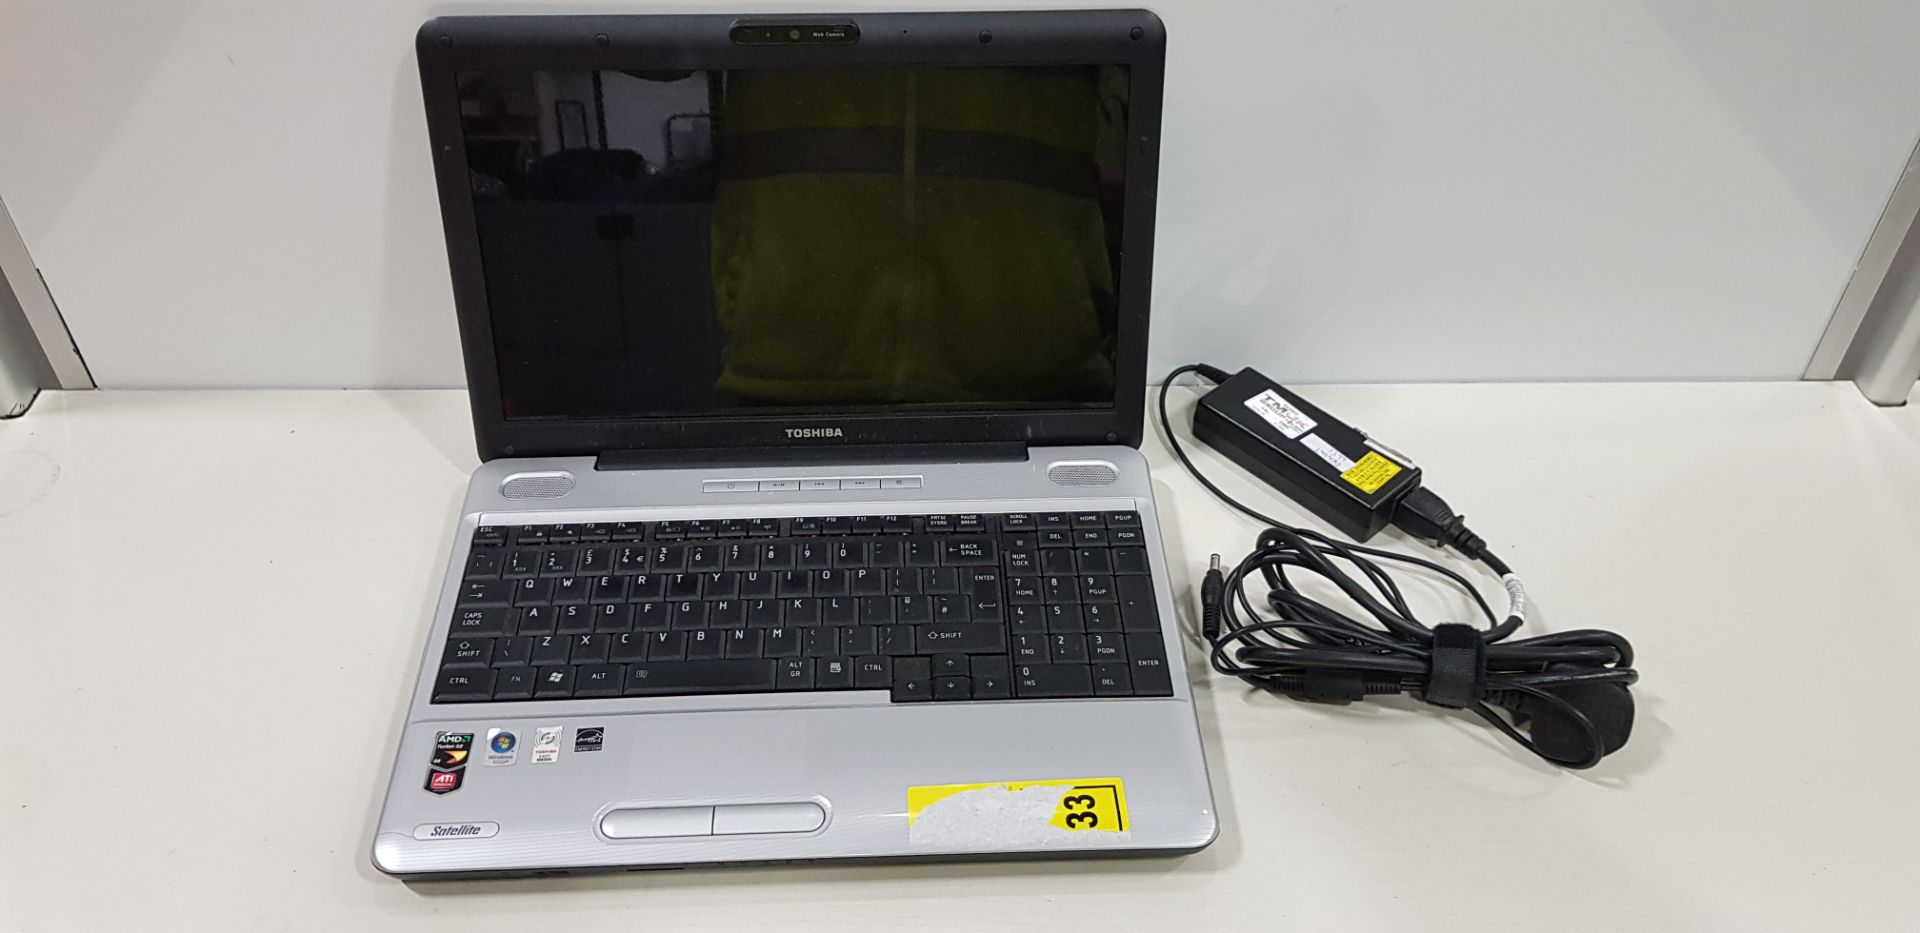 TOSHIBA LAPTOP - WITH CHARGER